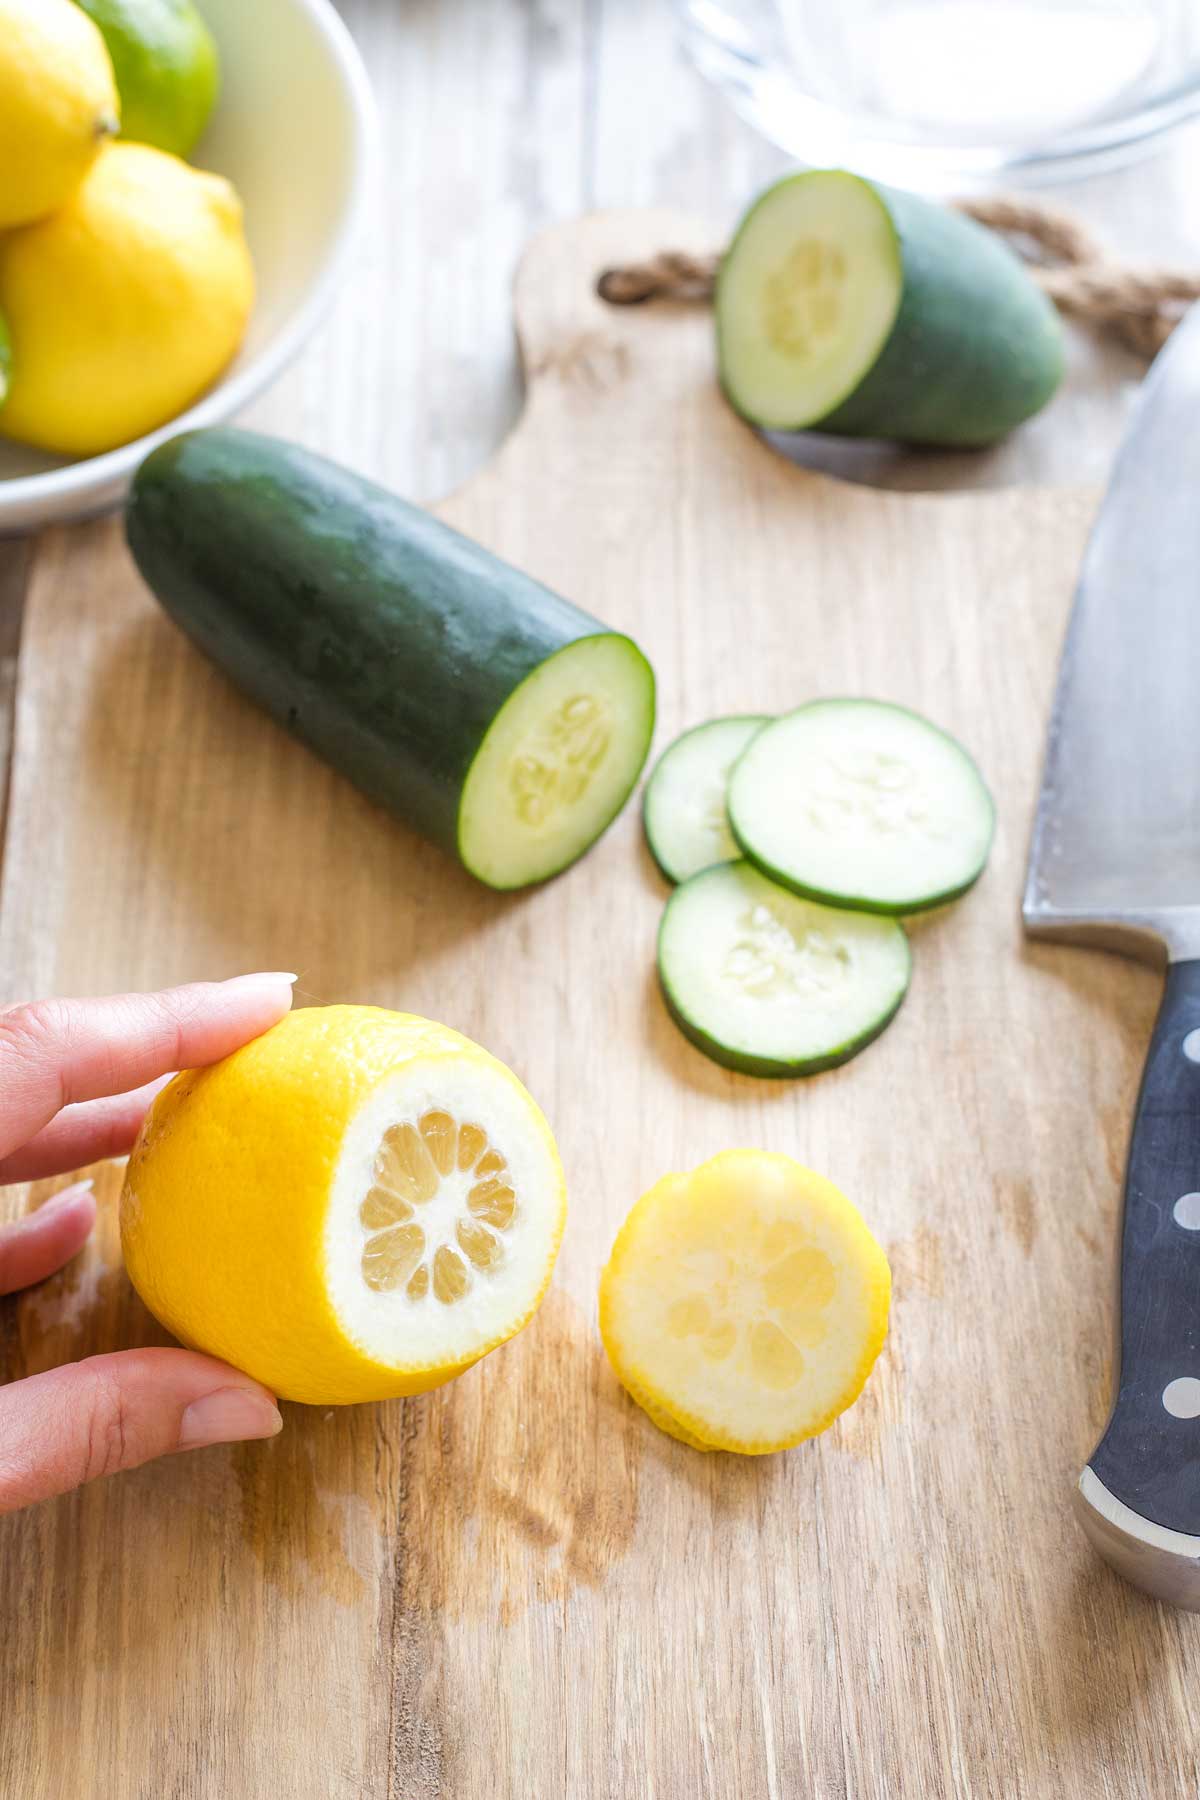 Hand holding lemon with end cut off on cutting board; partially sliced cucumber and extra lemons and limes in background.